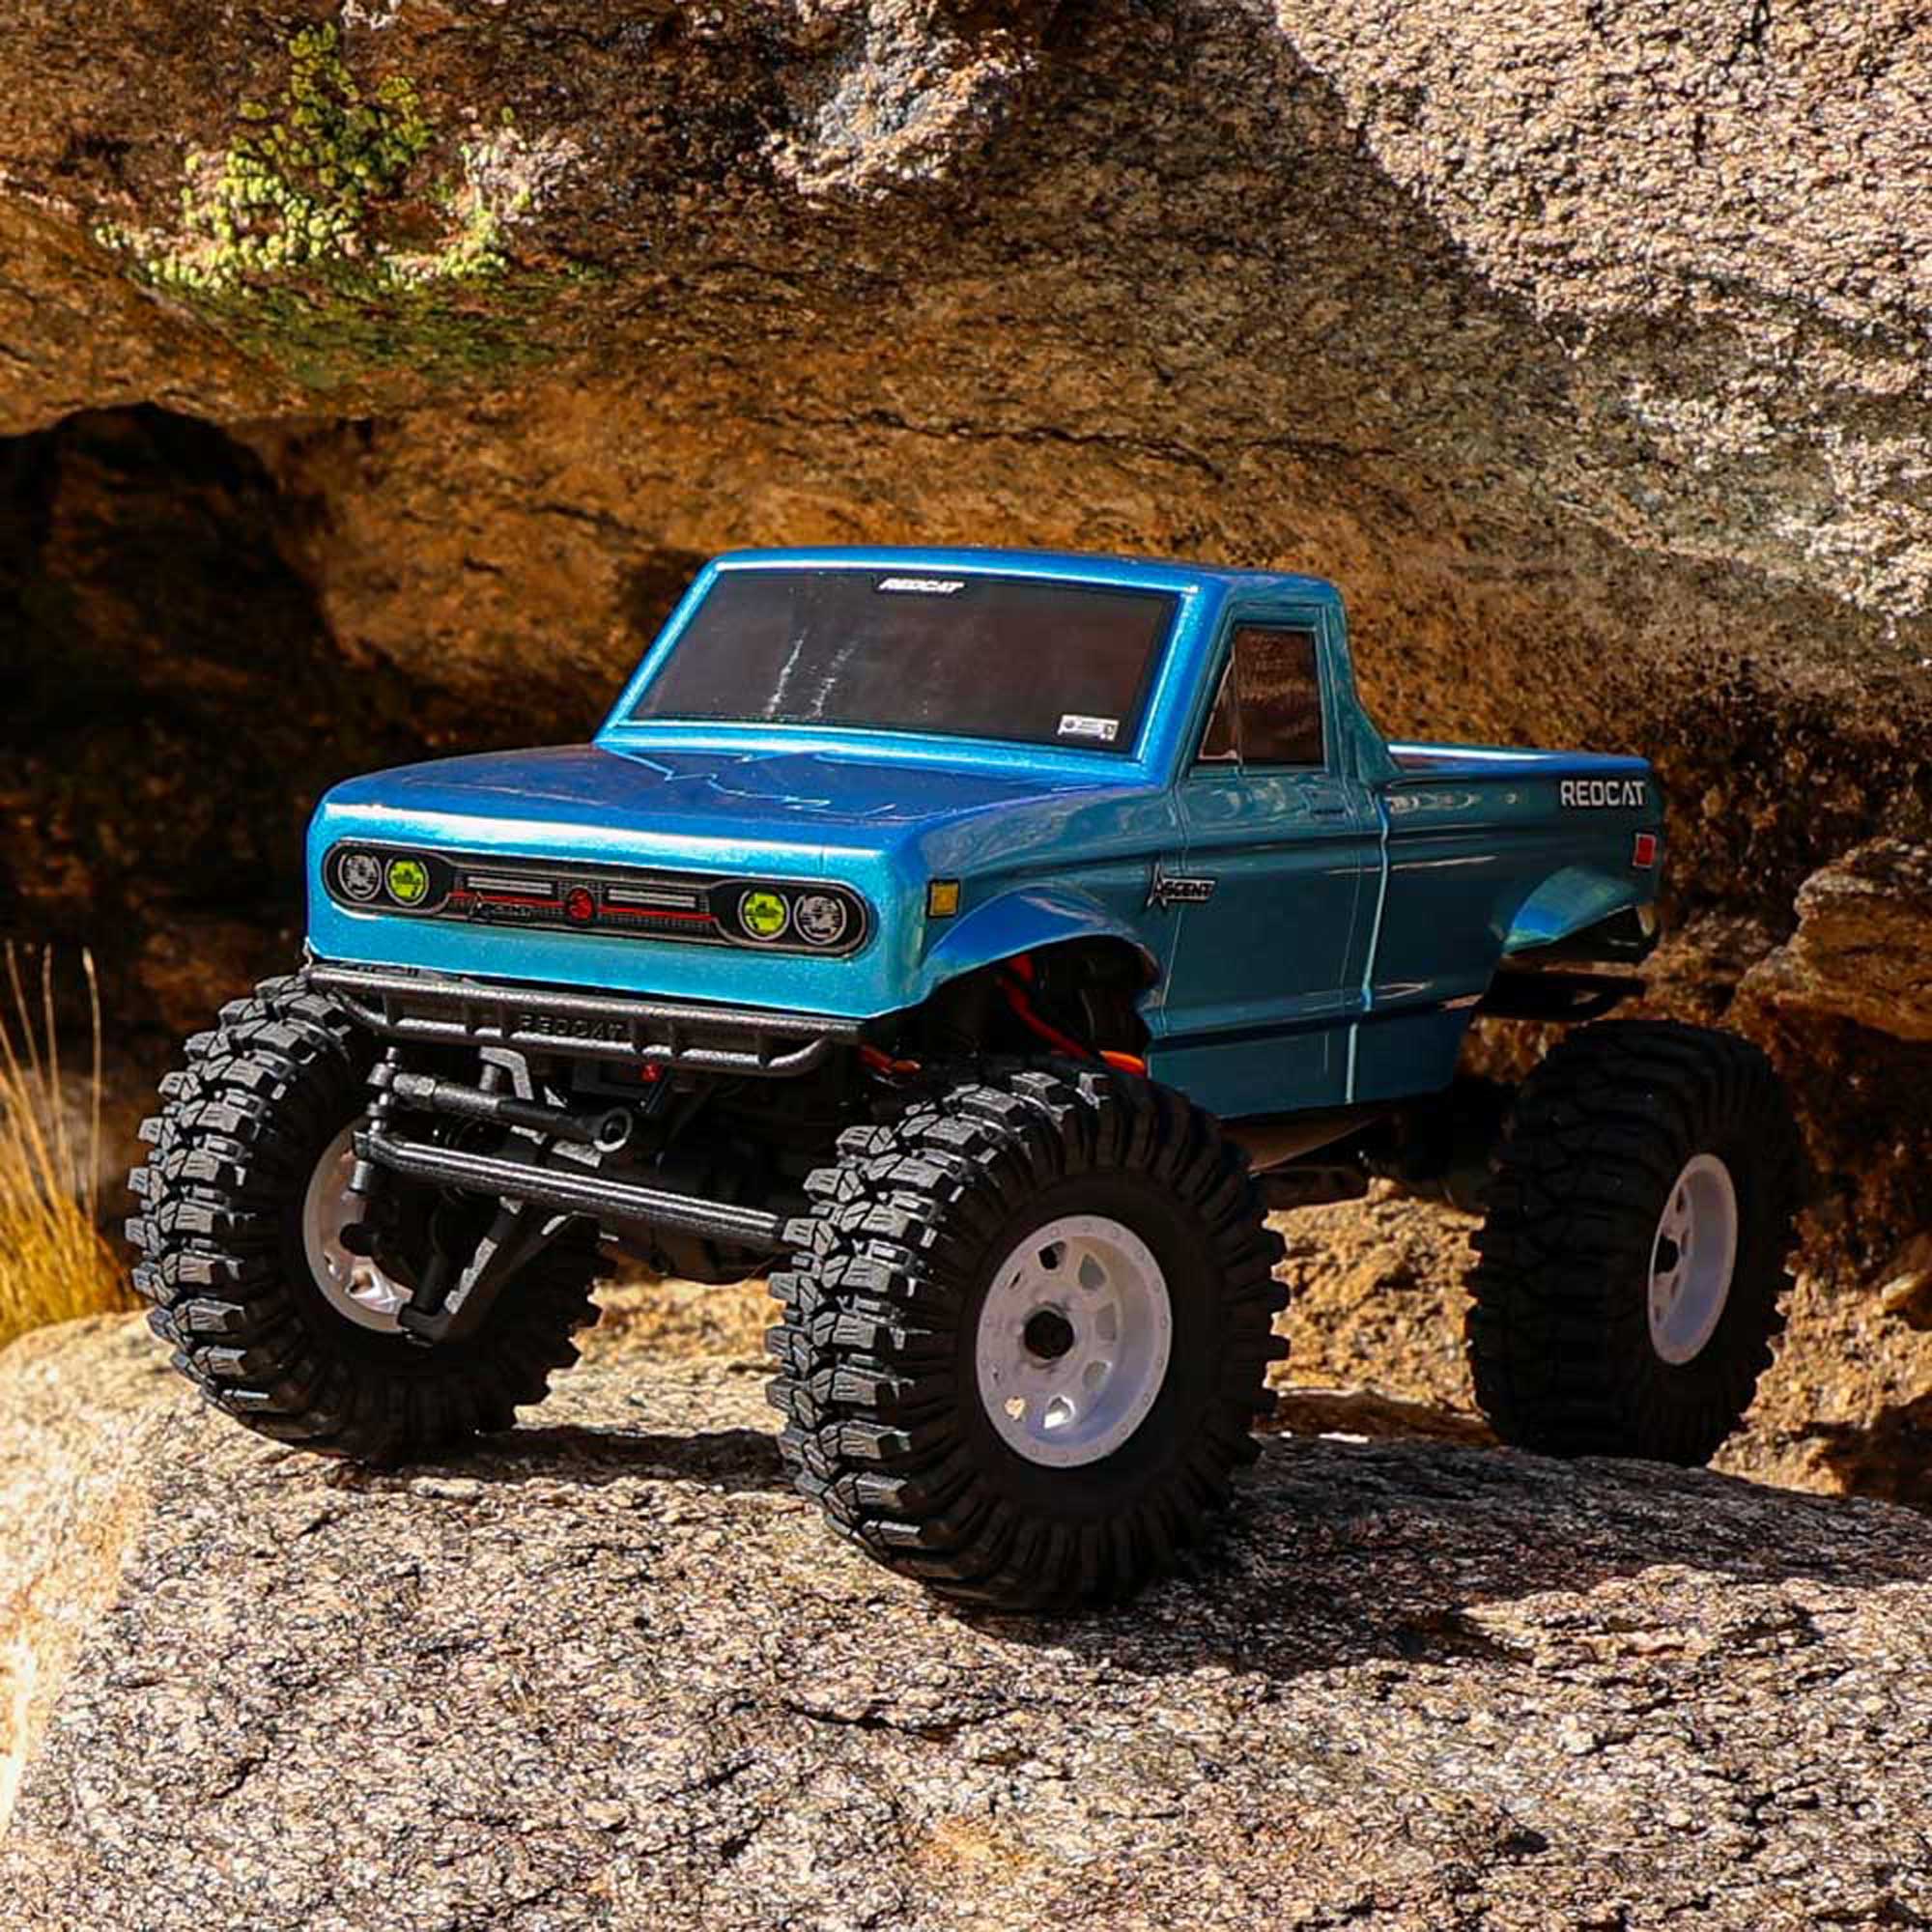 1/18 Ascent-18 4x4 Brushed Electric Rock Crawler RTR, Blue